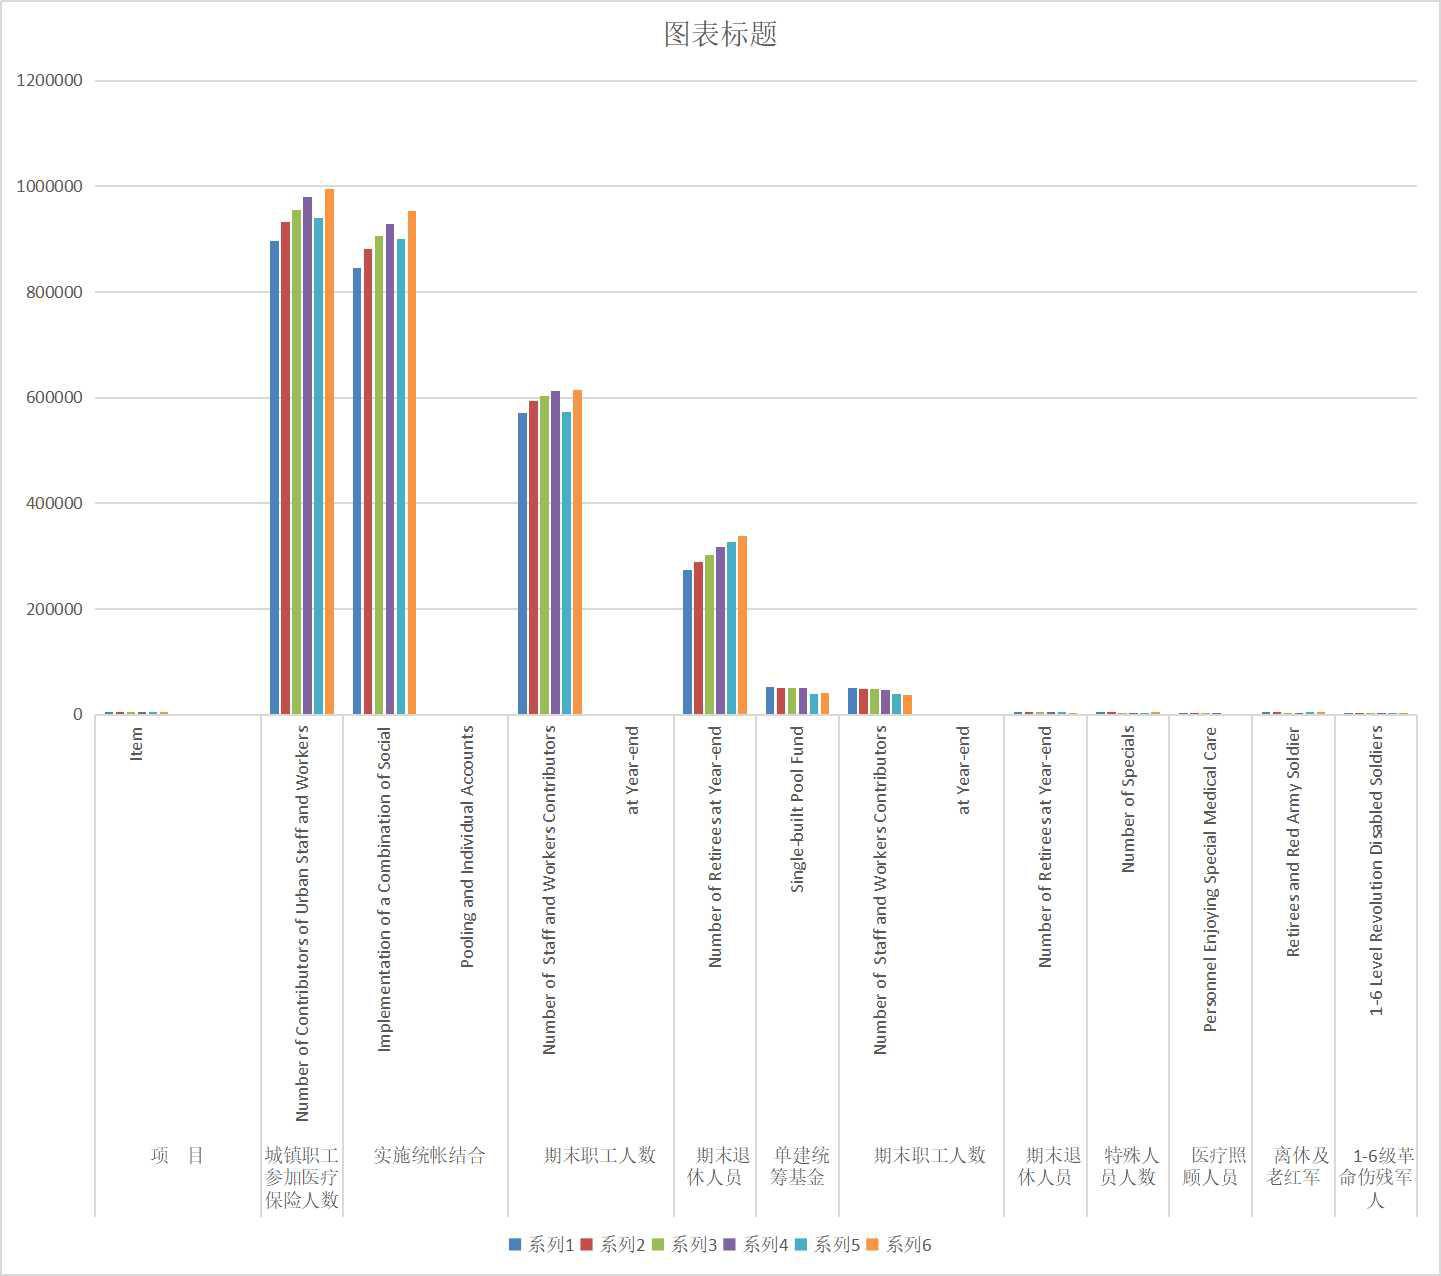 The situation of urban workers and special personnel participating in basic medical insurance in Qinghai Province (1999-2020)